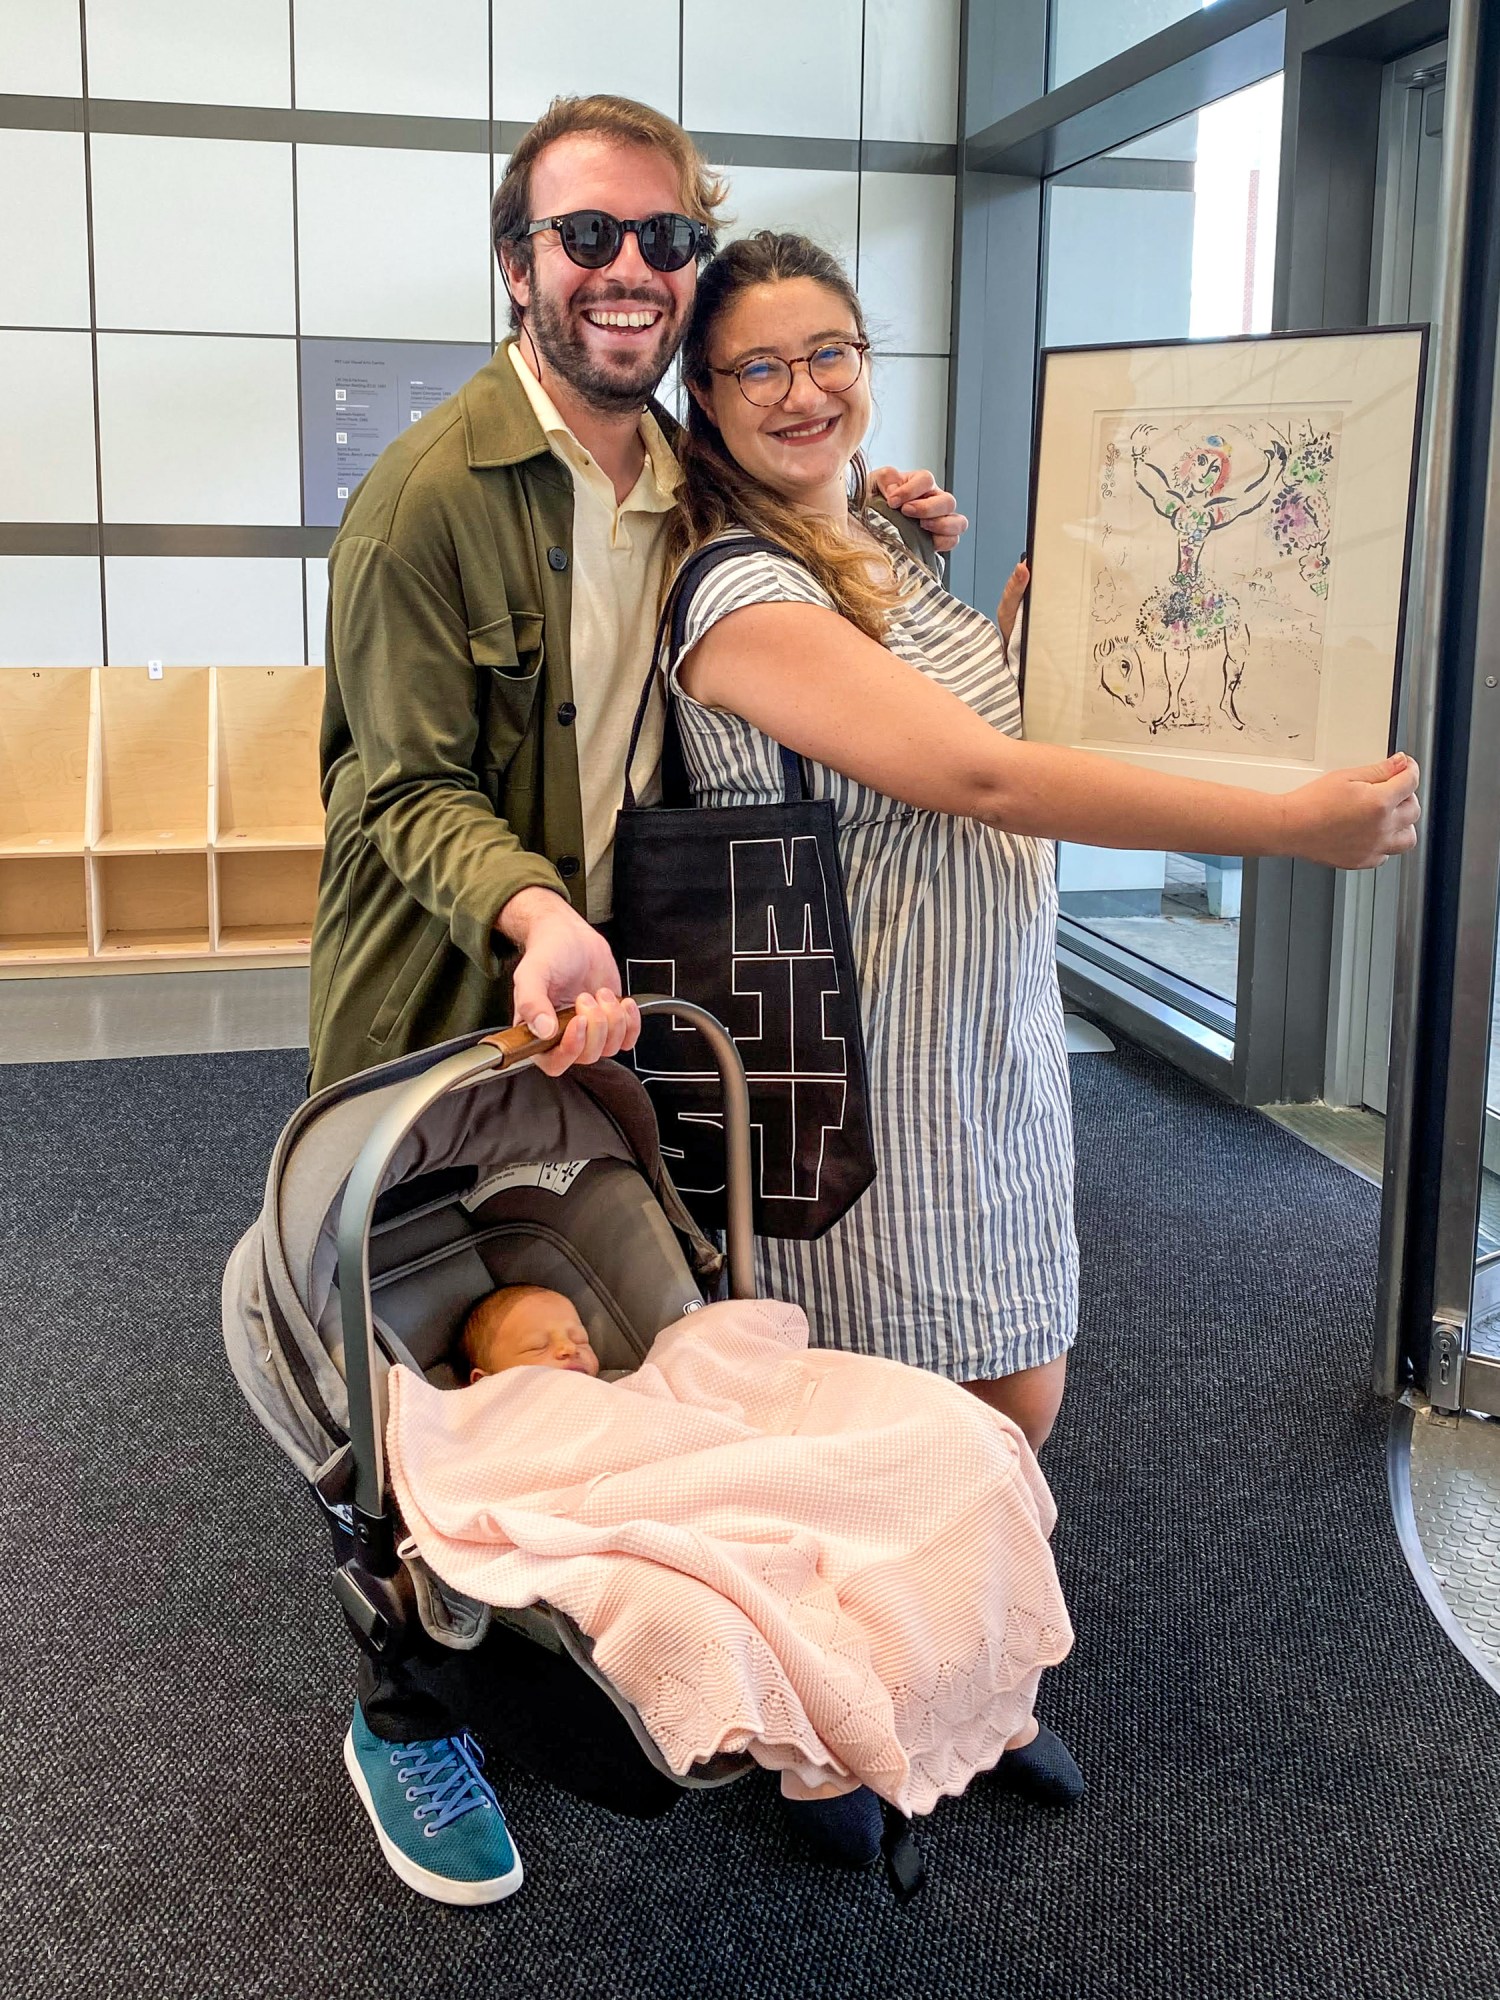 Carmelo Ignaccolo and his wife and infant hold up a framed work of art